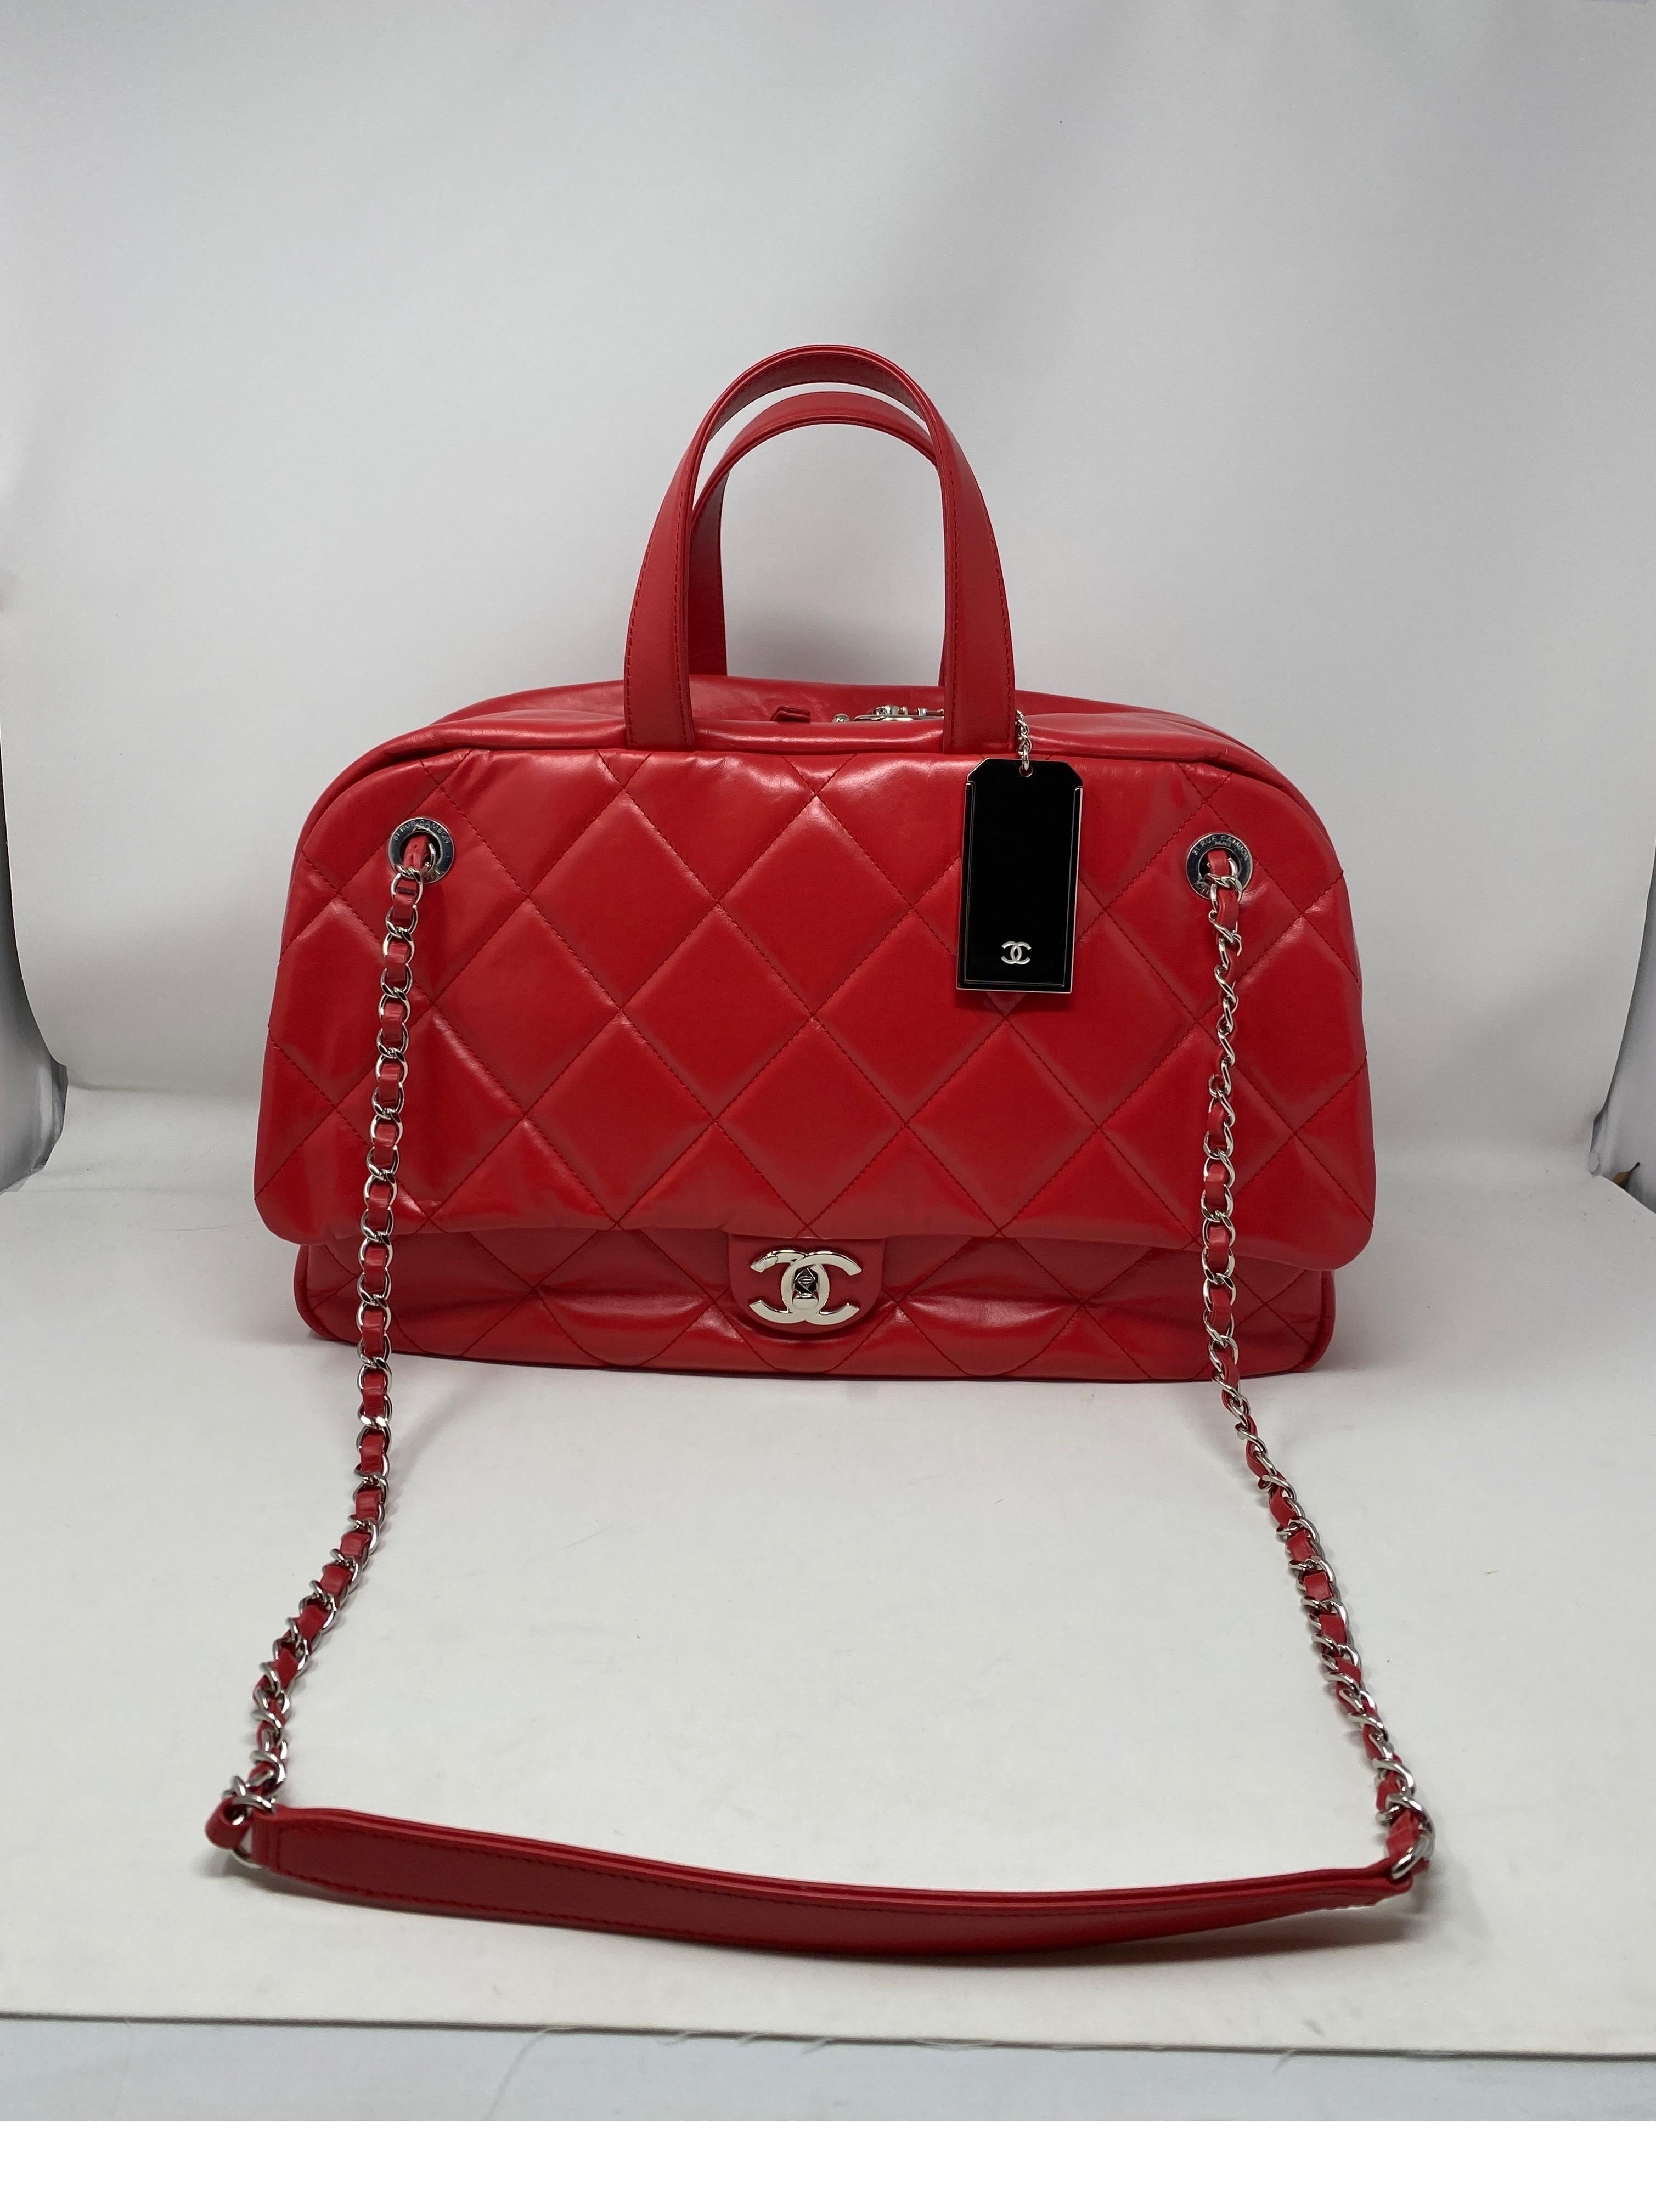 Chanel Large Red Bowler Bag. Mint like new condition. Bag was never worn. Beautiful bright red leather. Looks like the XXL airline bag. Similar in shape. This bag can be worn as luggage or as a big purse. Silver hardware. Great looking bag. Don't